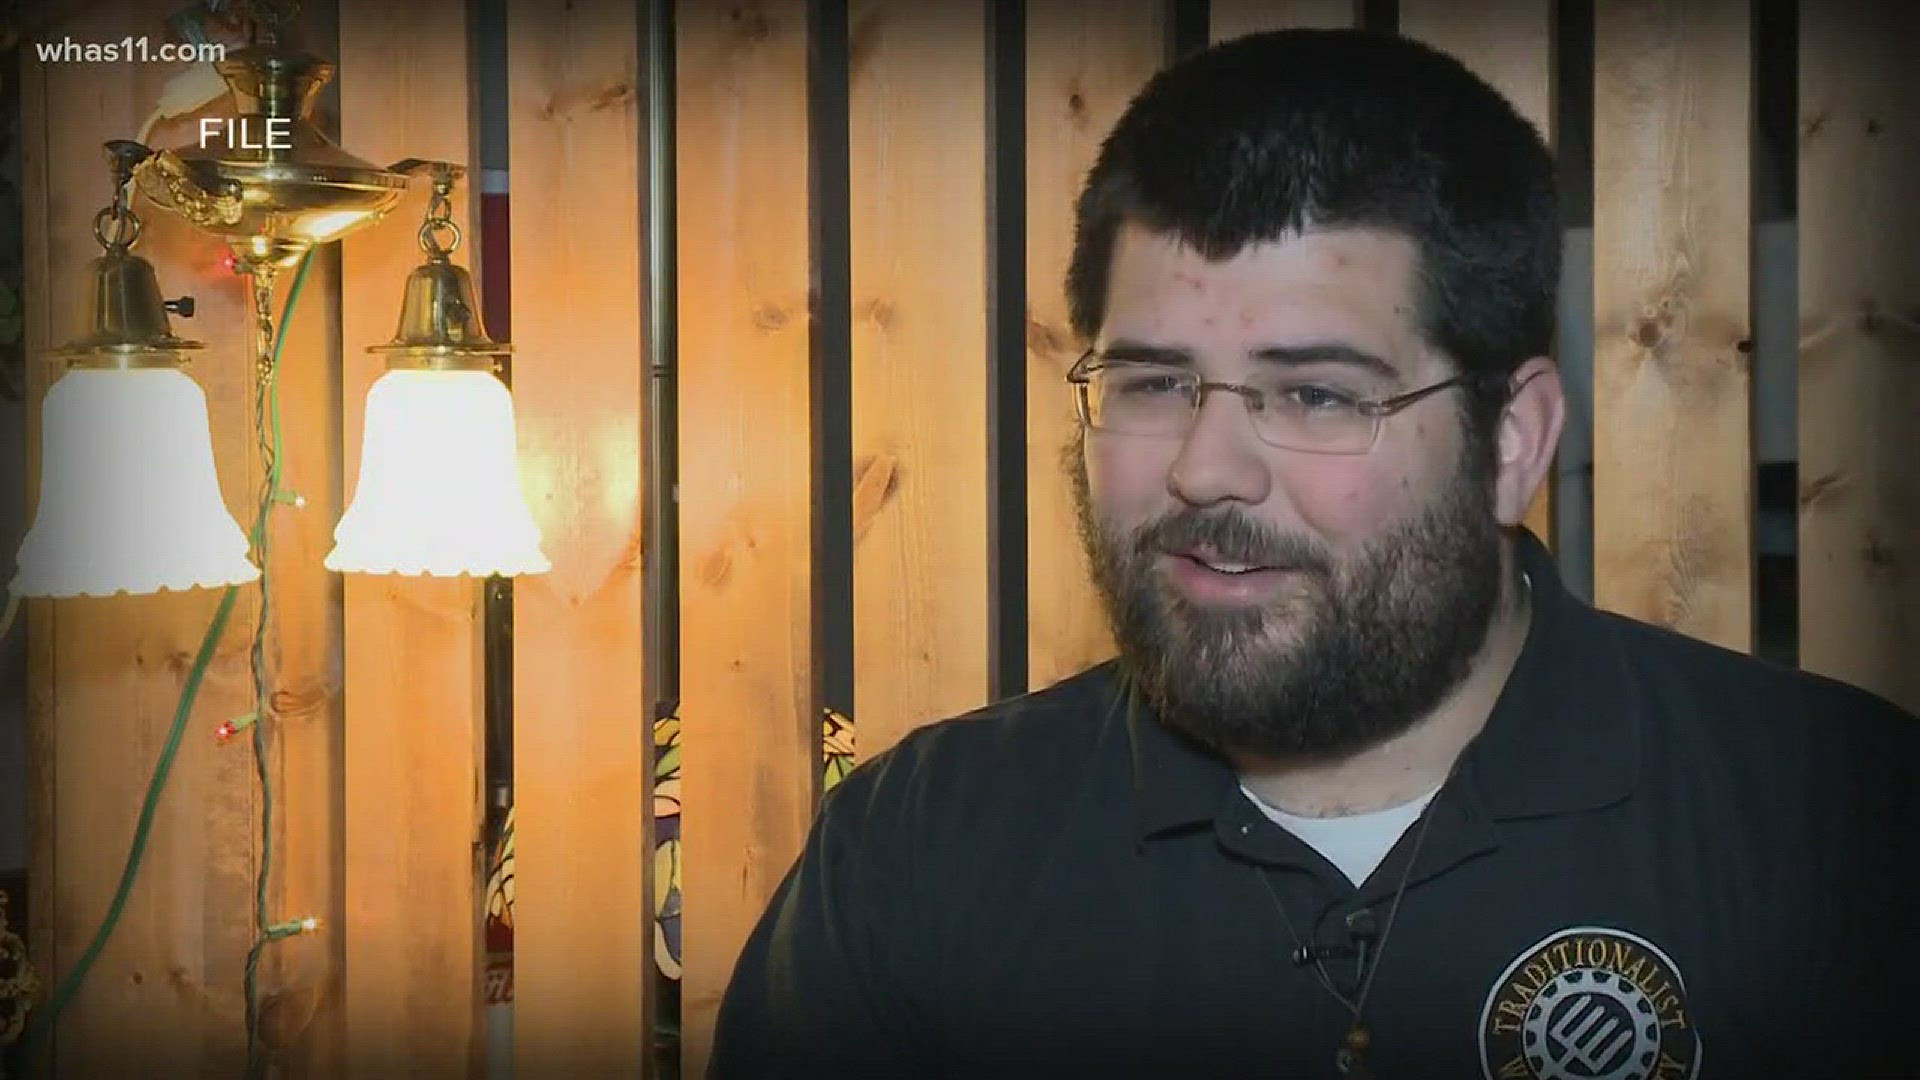 Matthew Heimbach is facing four charges tonight after an overnight incident that started in his home.